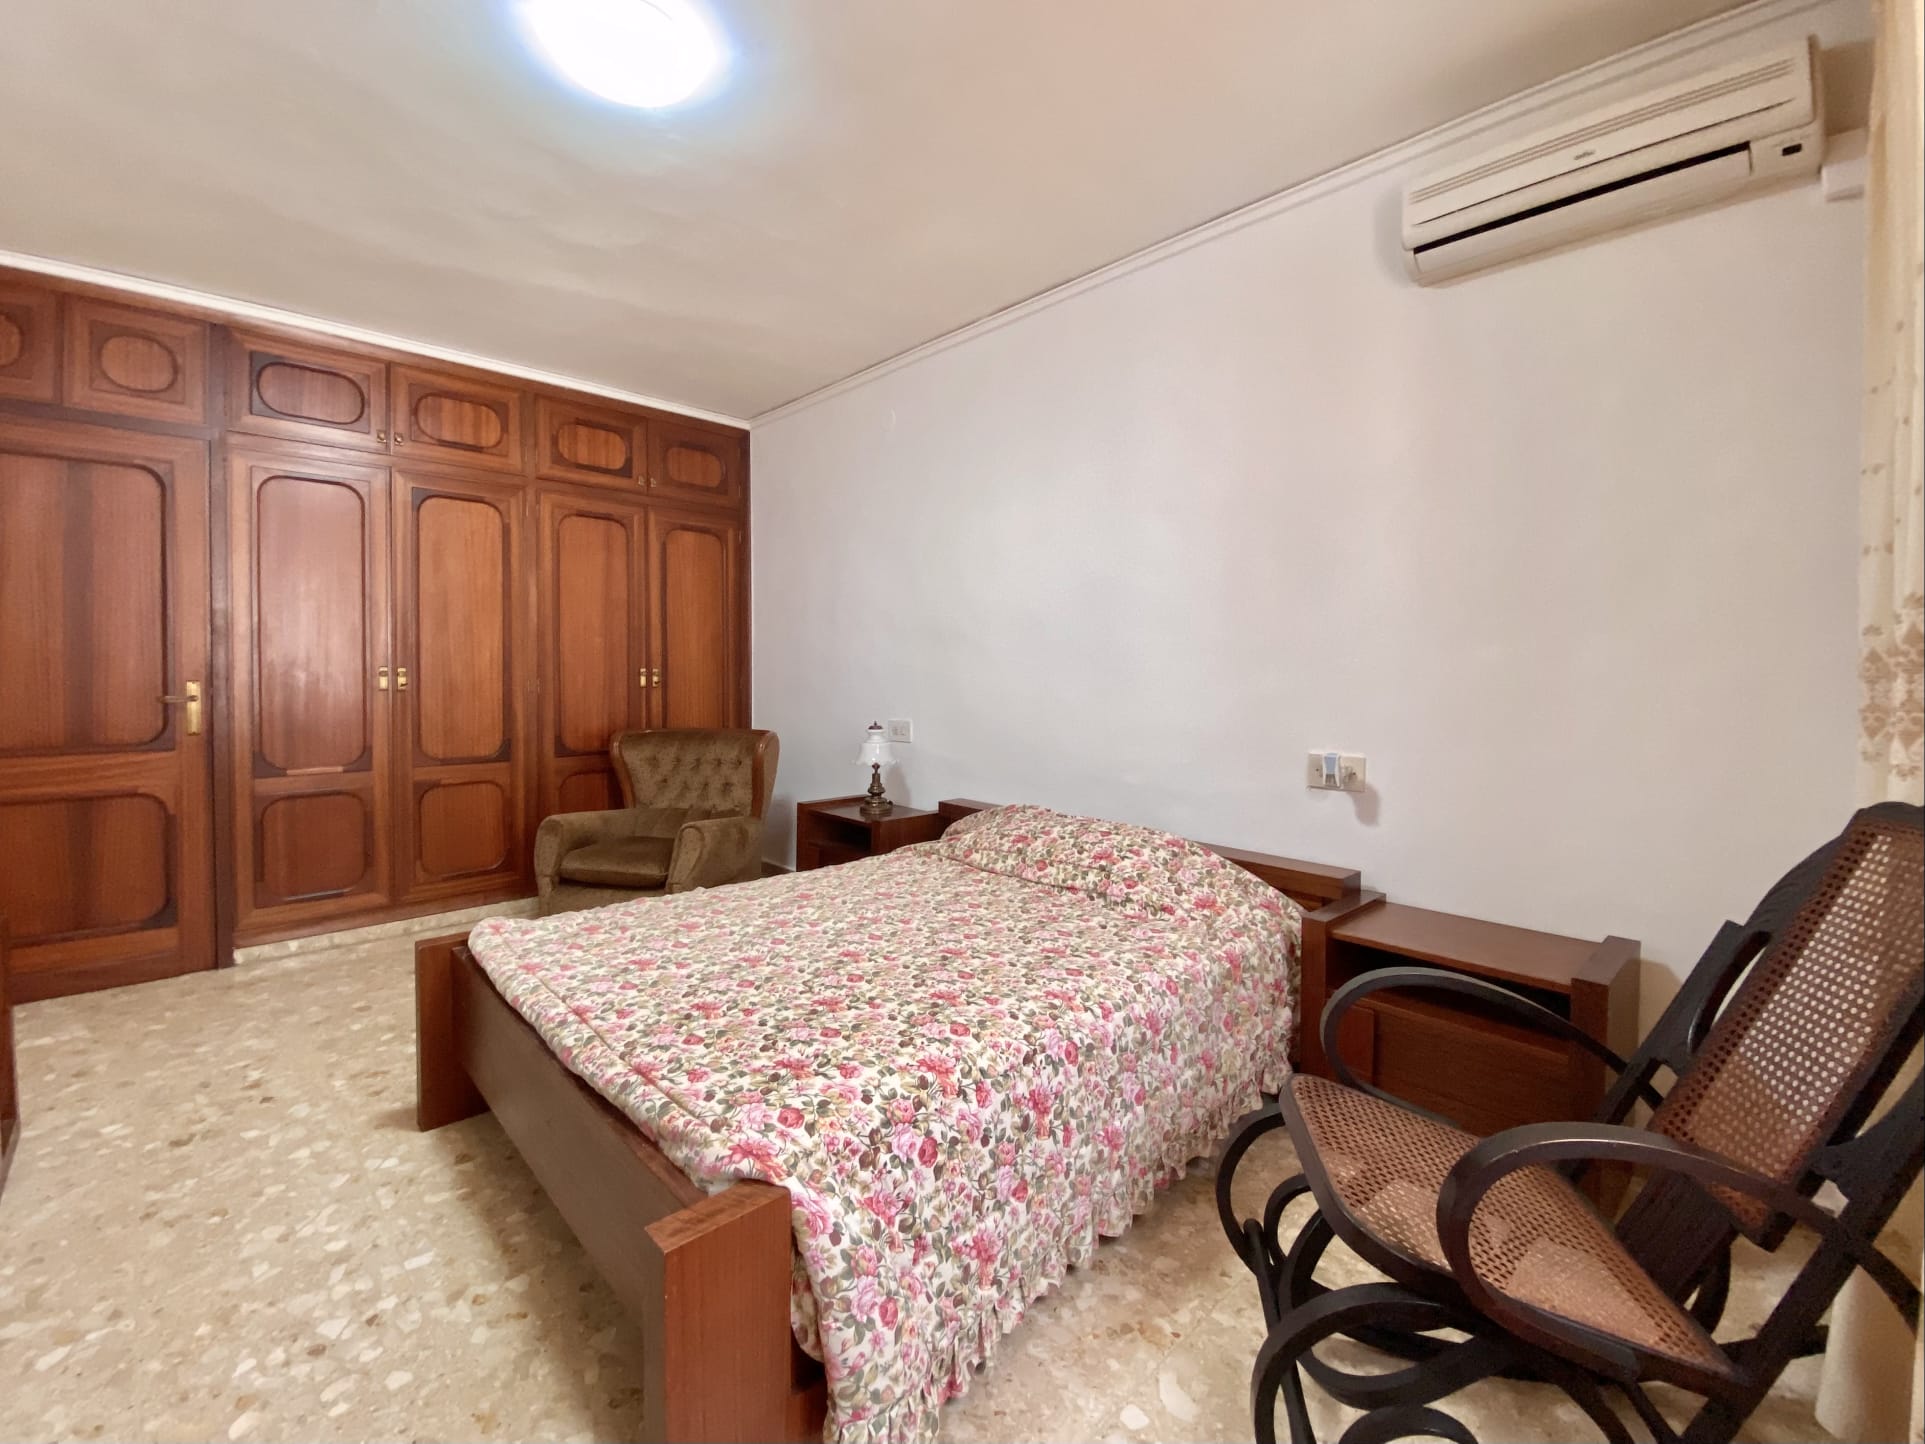 PENTHOUSE IN THE CENTER OF THE OLD TOWN OF JAVEA